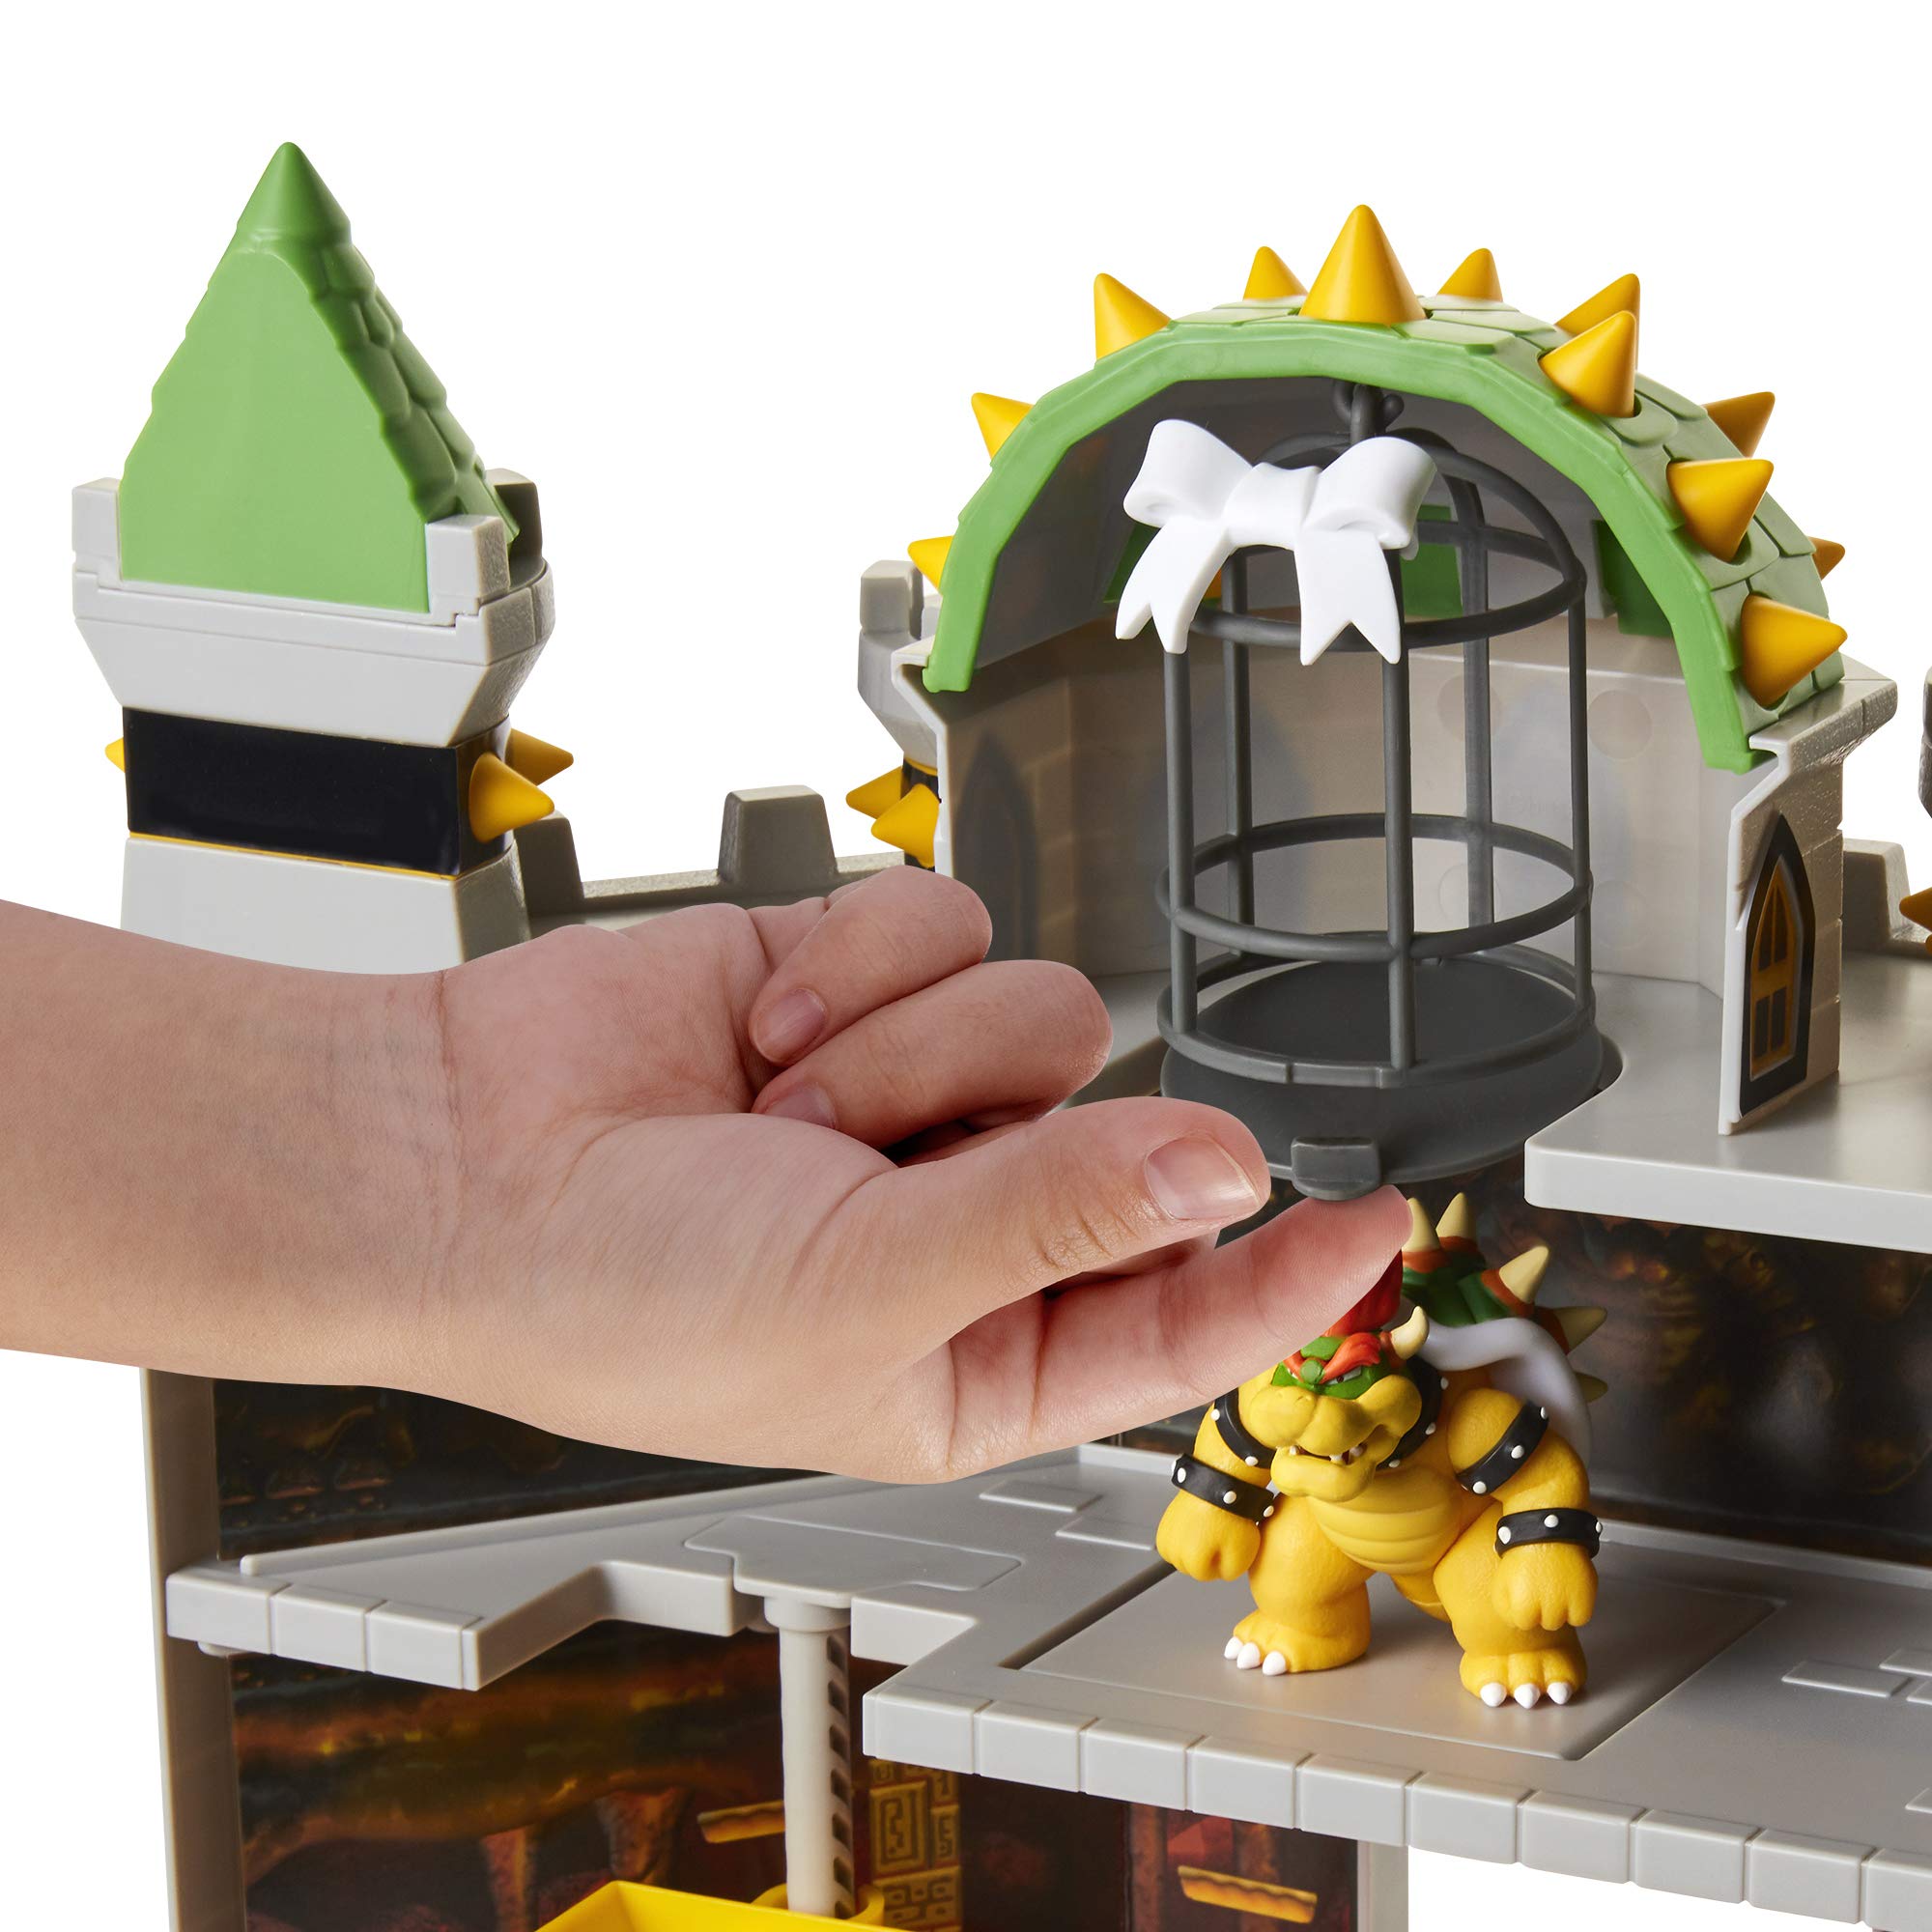 Super Mario 400204 Nintendo Deluxe Bowser's Castle Playset with 2.5